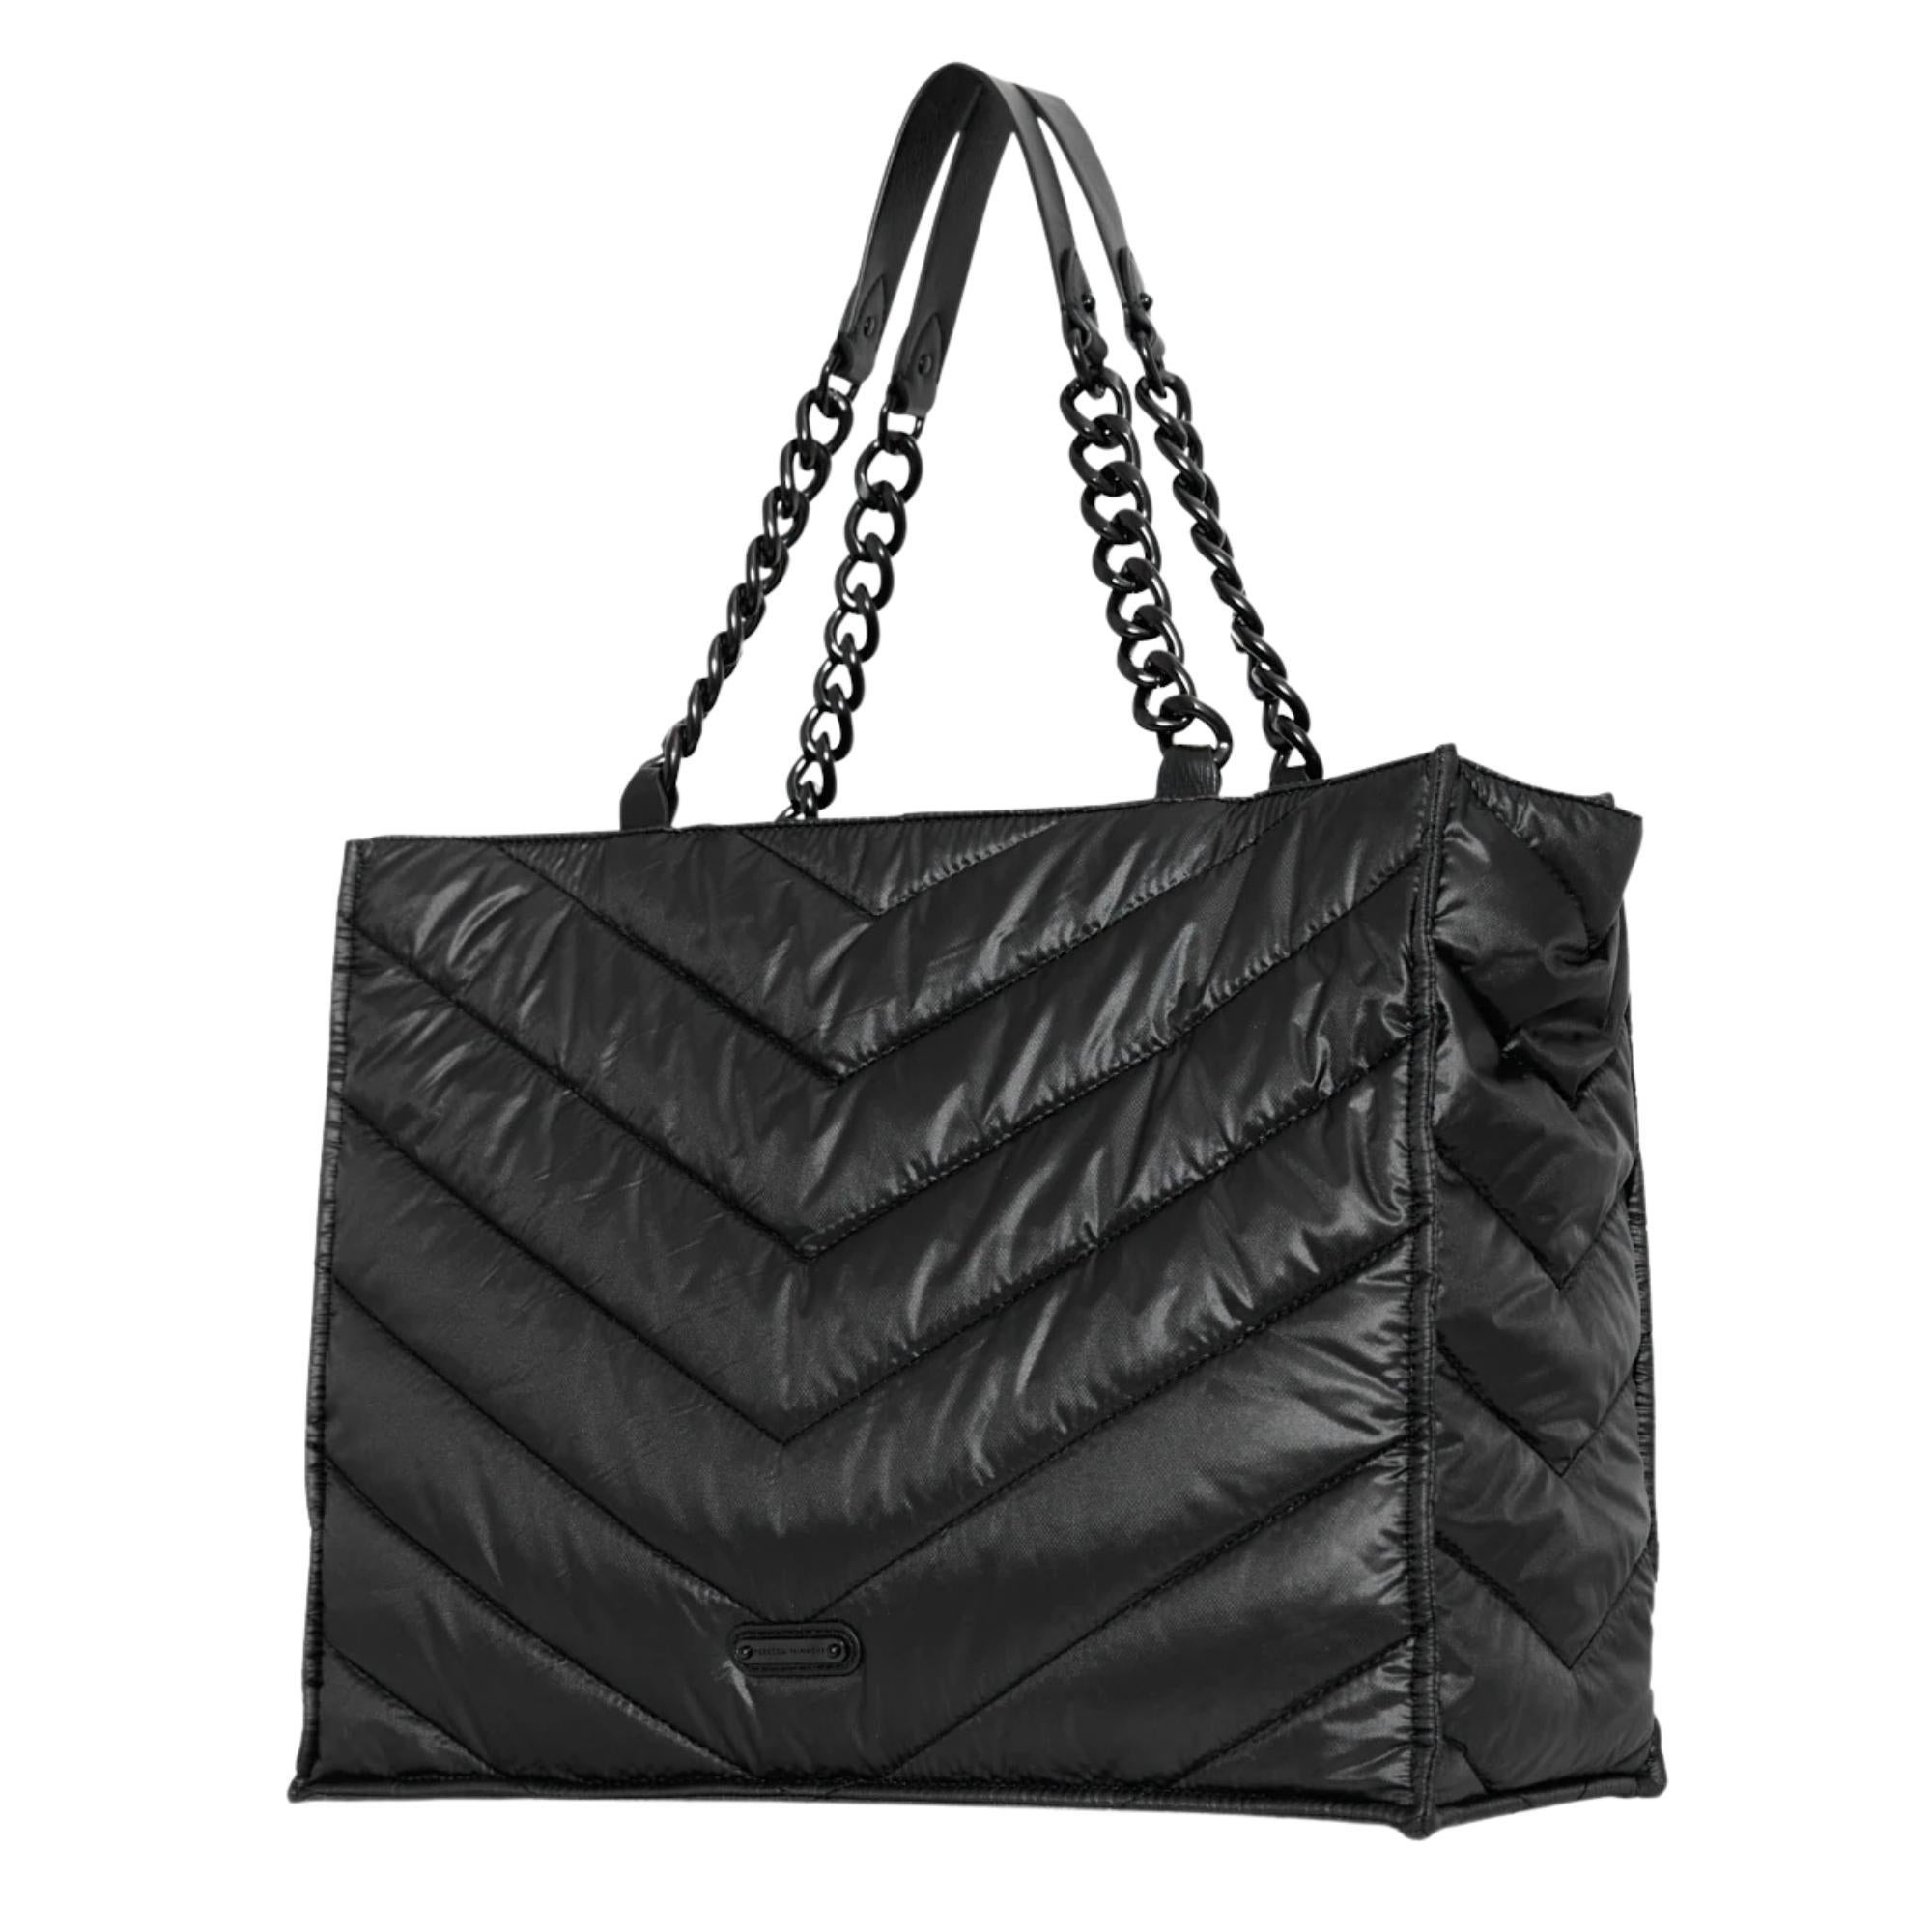 An icon in the making. Our latest addition to join the Edie family is distinguished by its chevron quilted pattern and black shellac chain shoulder straps. Crafted from ultra-lightweight nylon, it has a front exterior slip pocket for keeping small